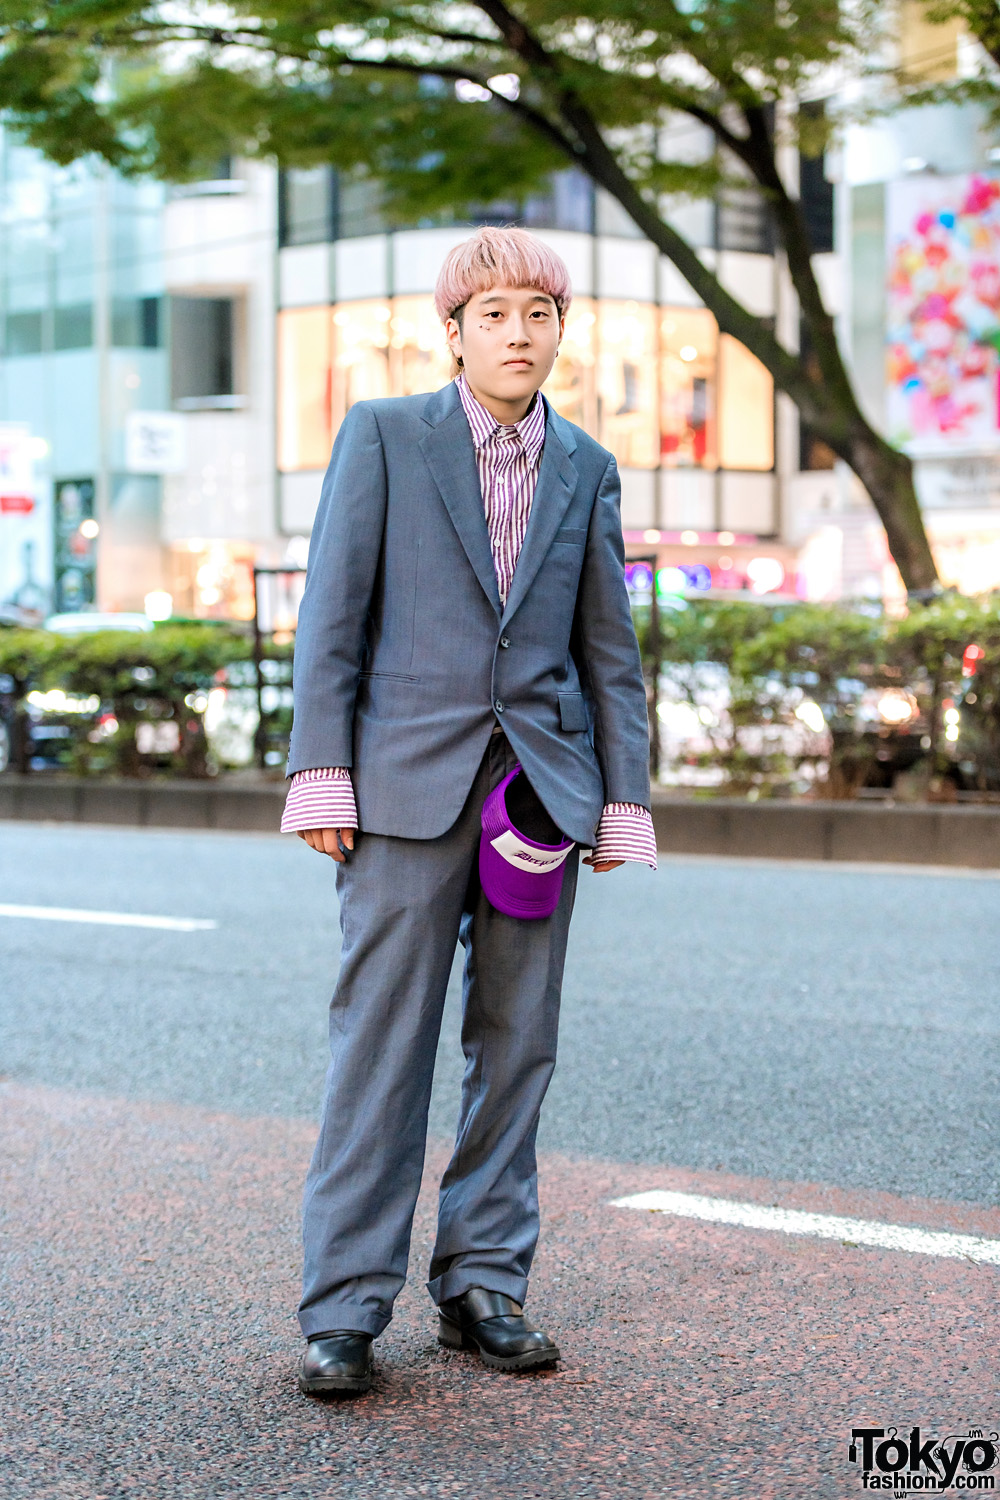 Harajuku Guy w/ Pink Hair, Striped Top & Burberry Suit